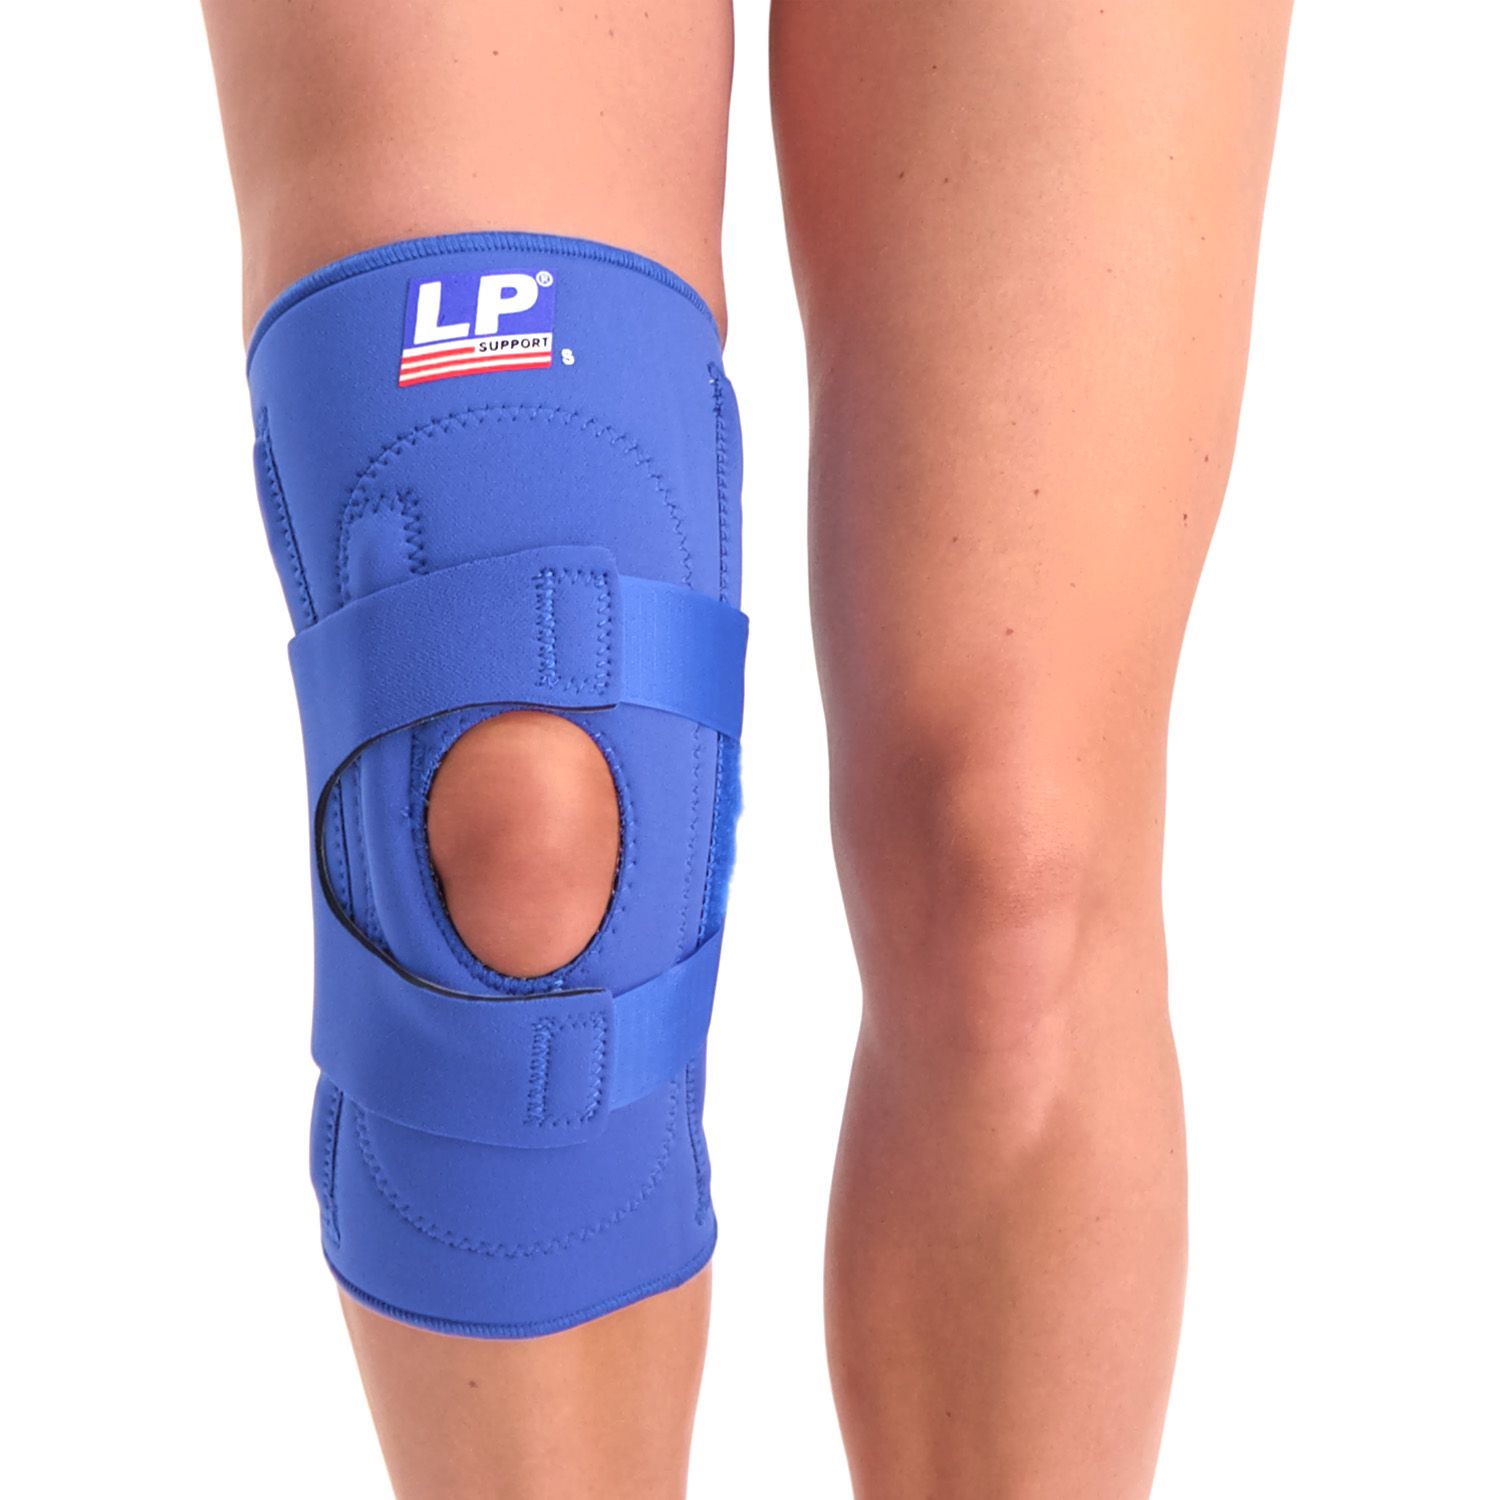 LP Support 721 Knee support front view